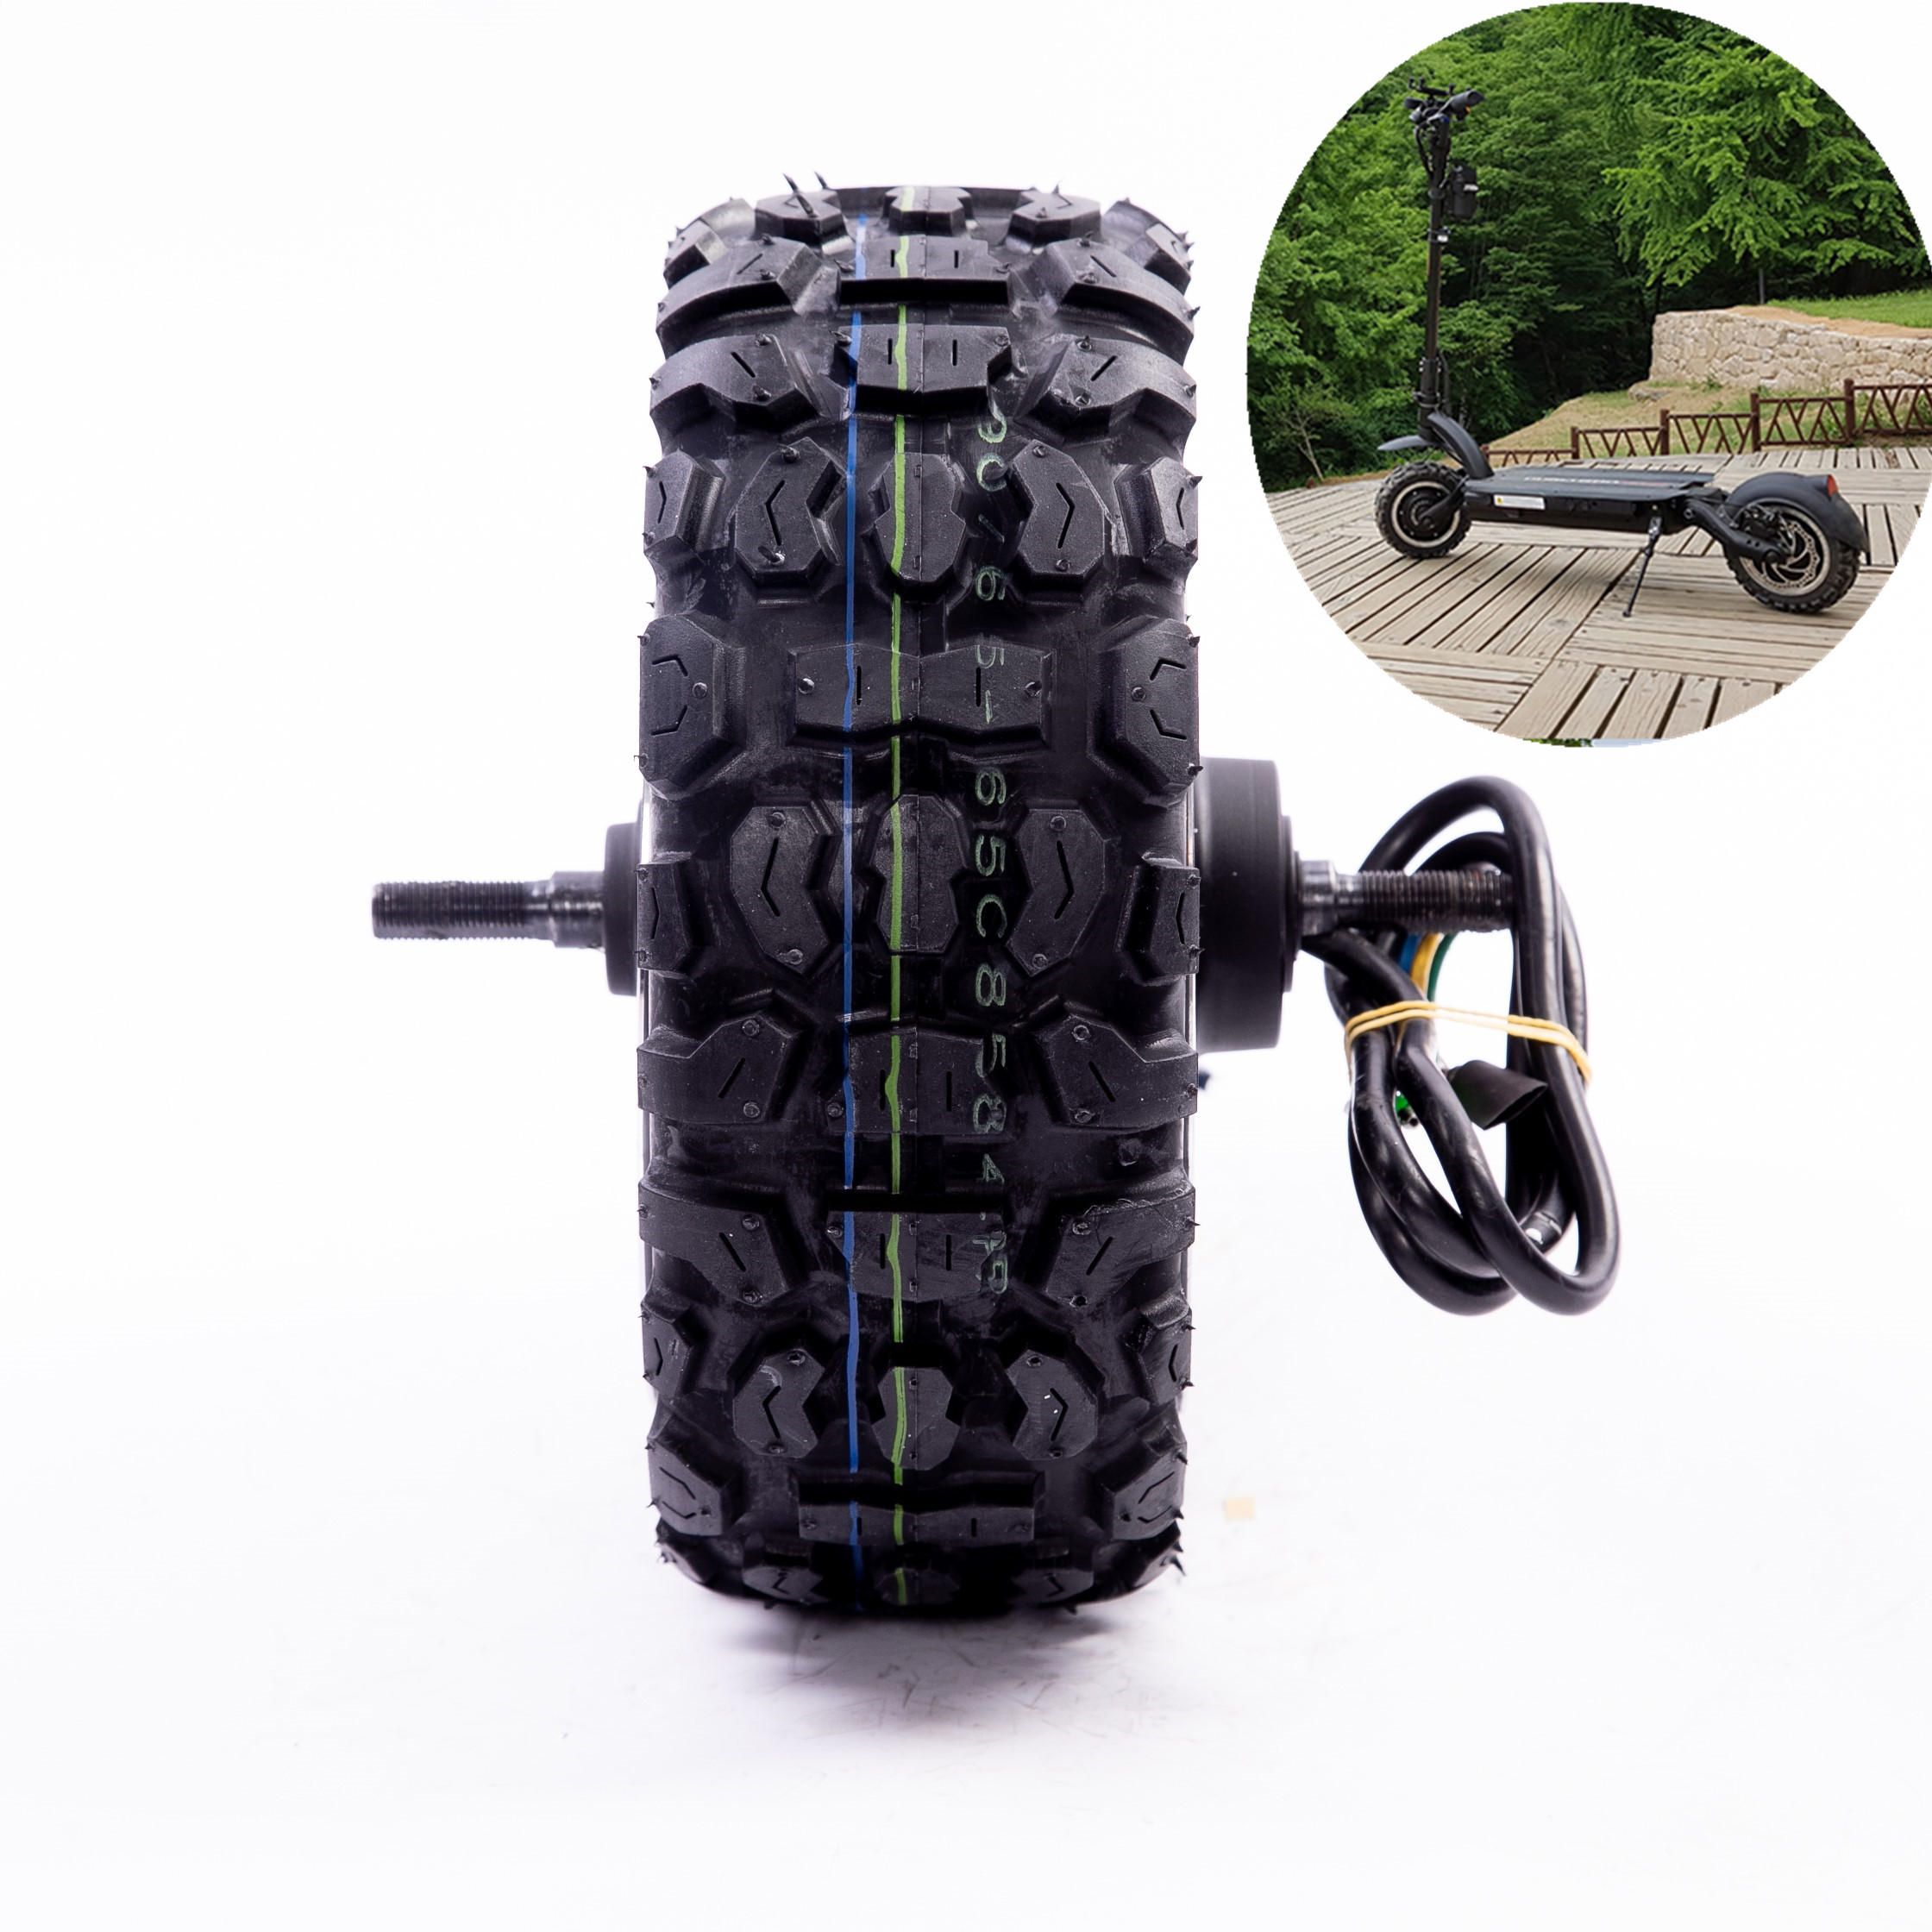 High Speed Tyres 11 inch 60v 1600w E Bike Motor 11" Electric Motorcycle Takeaway Engine Buggy Dultron Motor Scooter Hub Motor